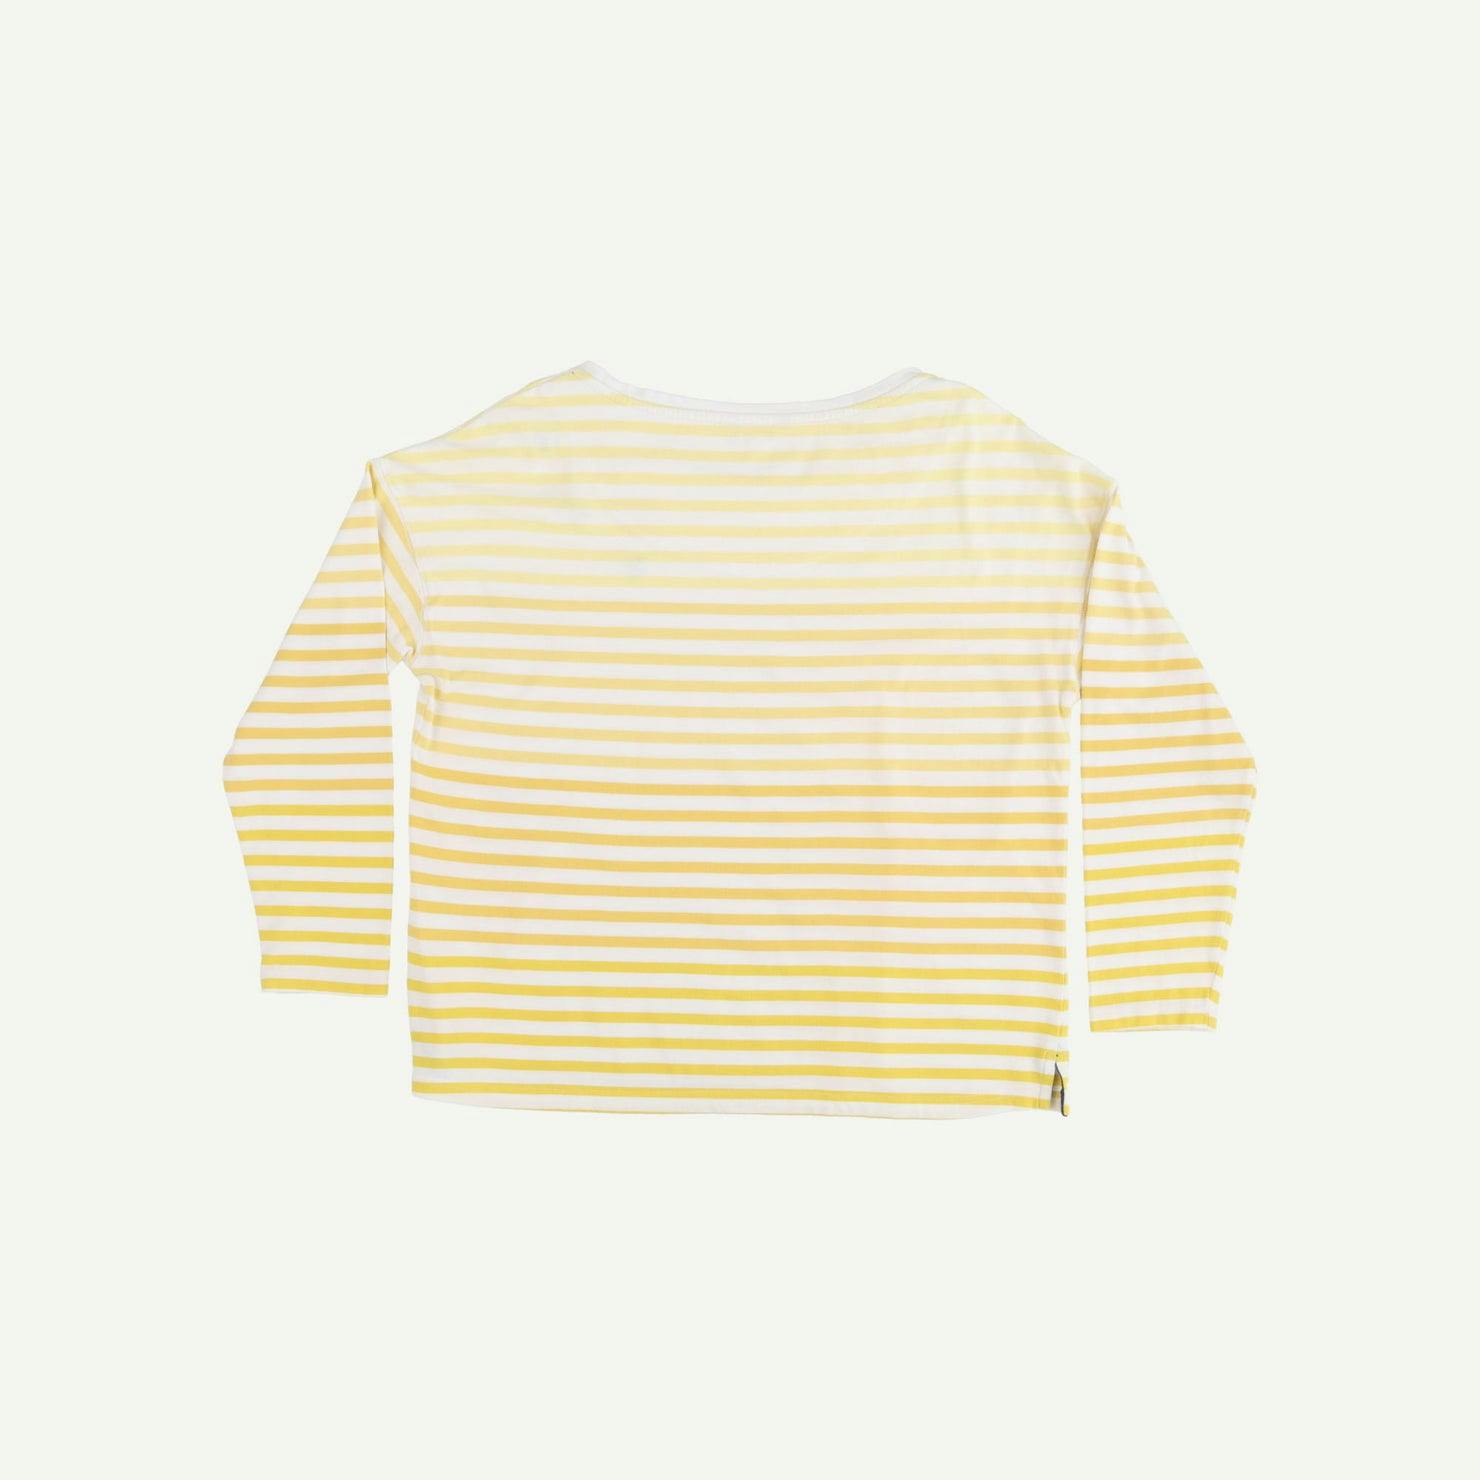 Joules Pre-loved Yellow Top